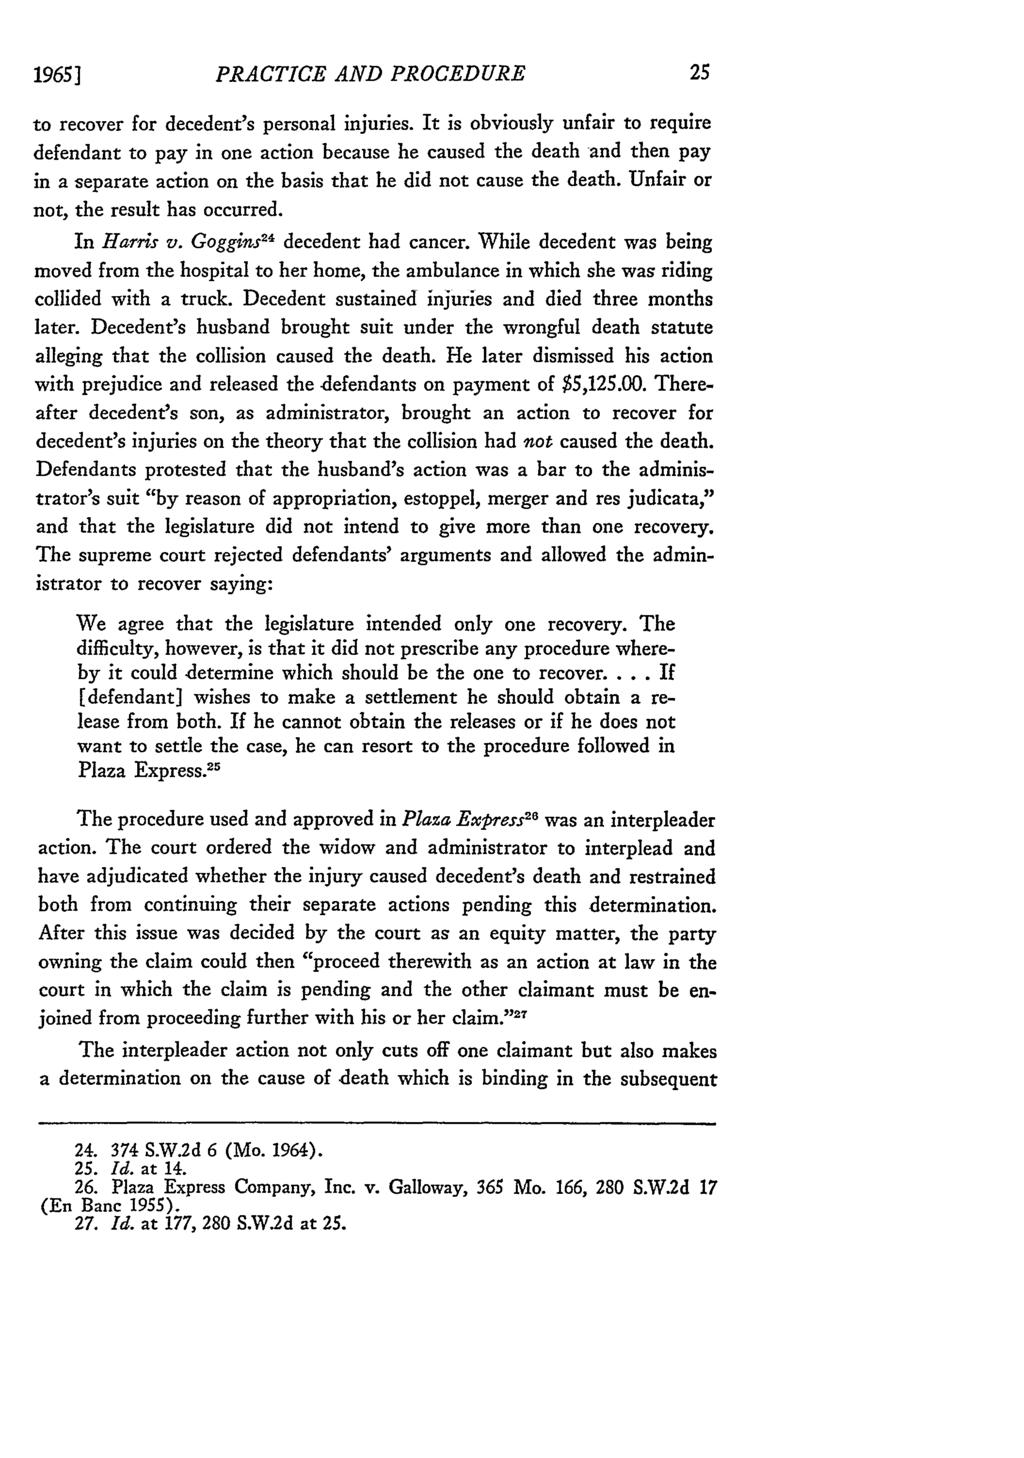 19651 Missouri Law Review, Vol. 30, Iss. 1 [1965], Art. 8 PRACTICE AND PROCEDURE to recover for decedent's personal injuries.